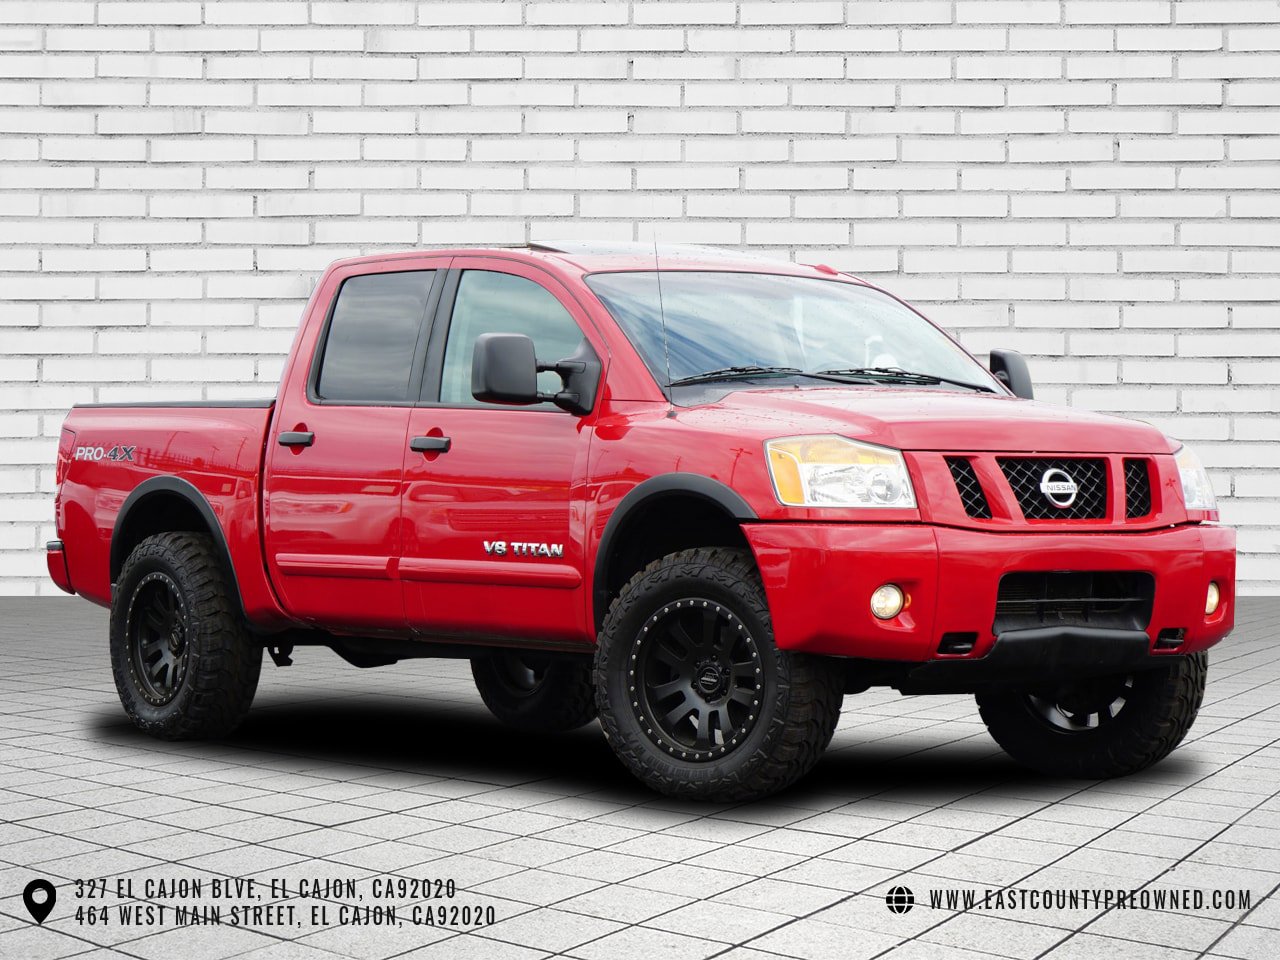 Used 2012 Nissan Titan for Sale Near Me in San Diego, CA - Autotrader